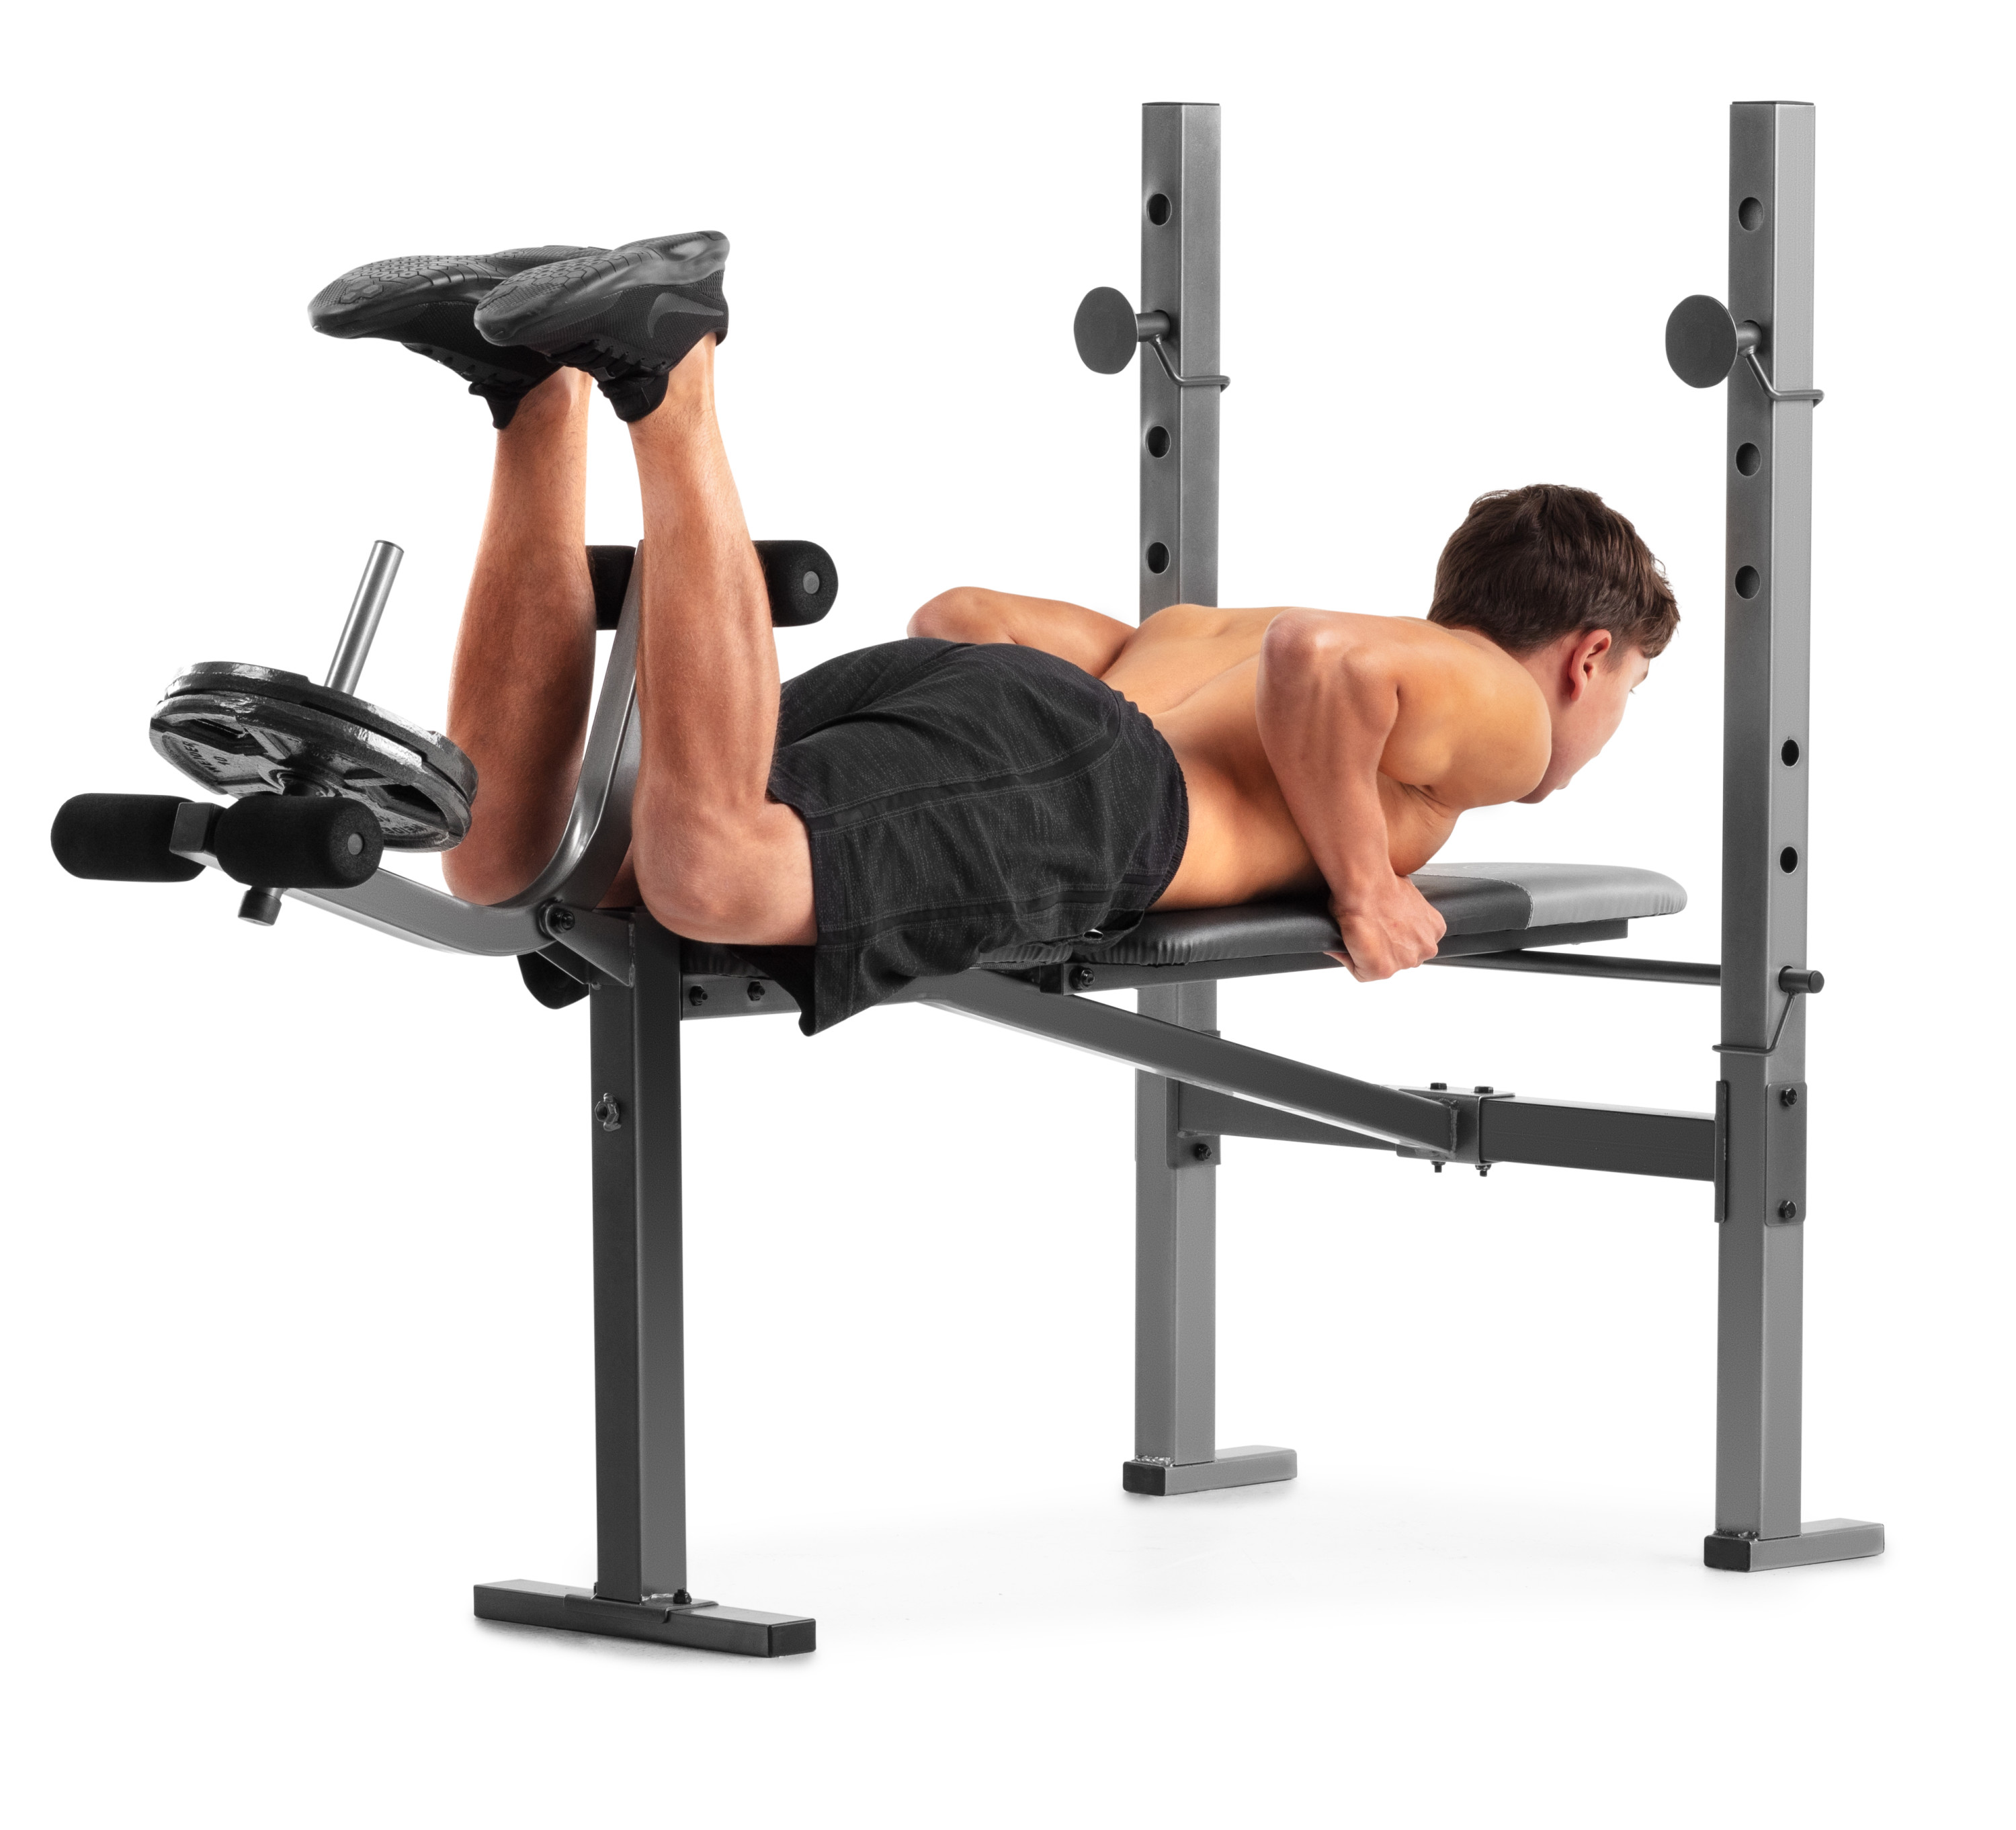 Weider XR 6.1 Adjustable Weight Bench with Leg Developer, 410 lb. Weight Limit - image 7 of 12